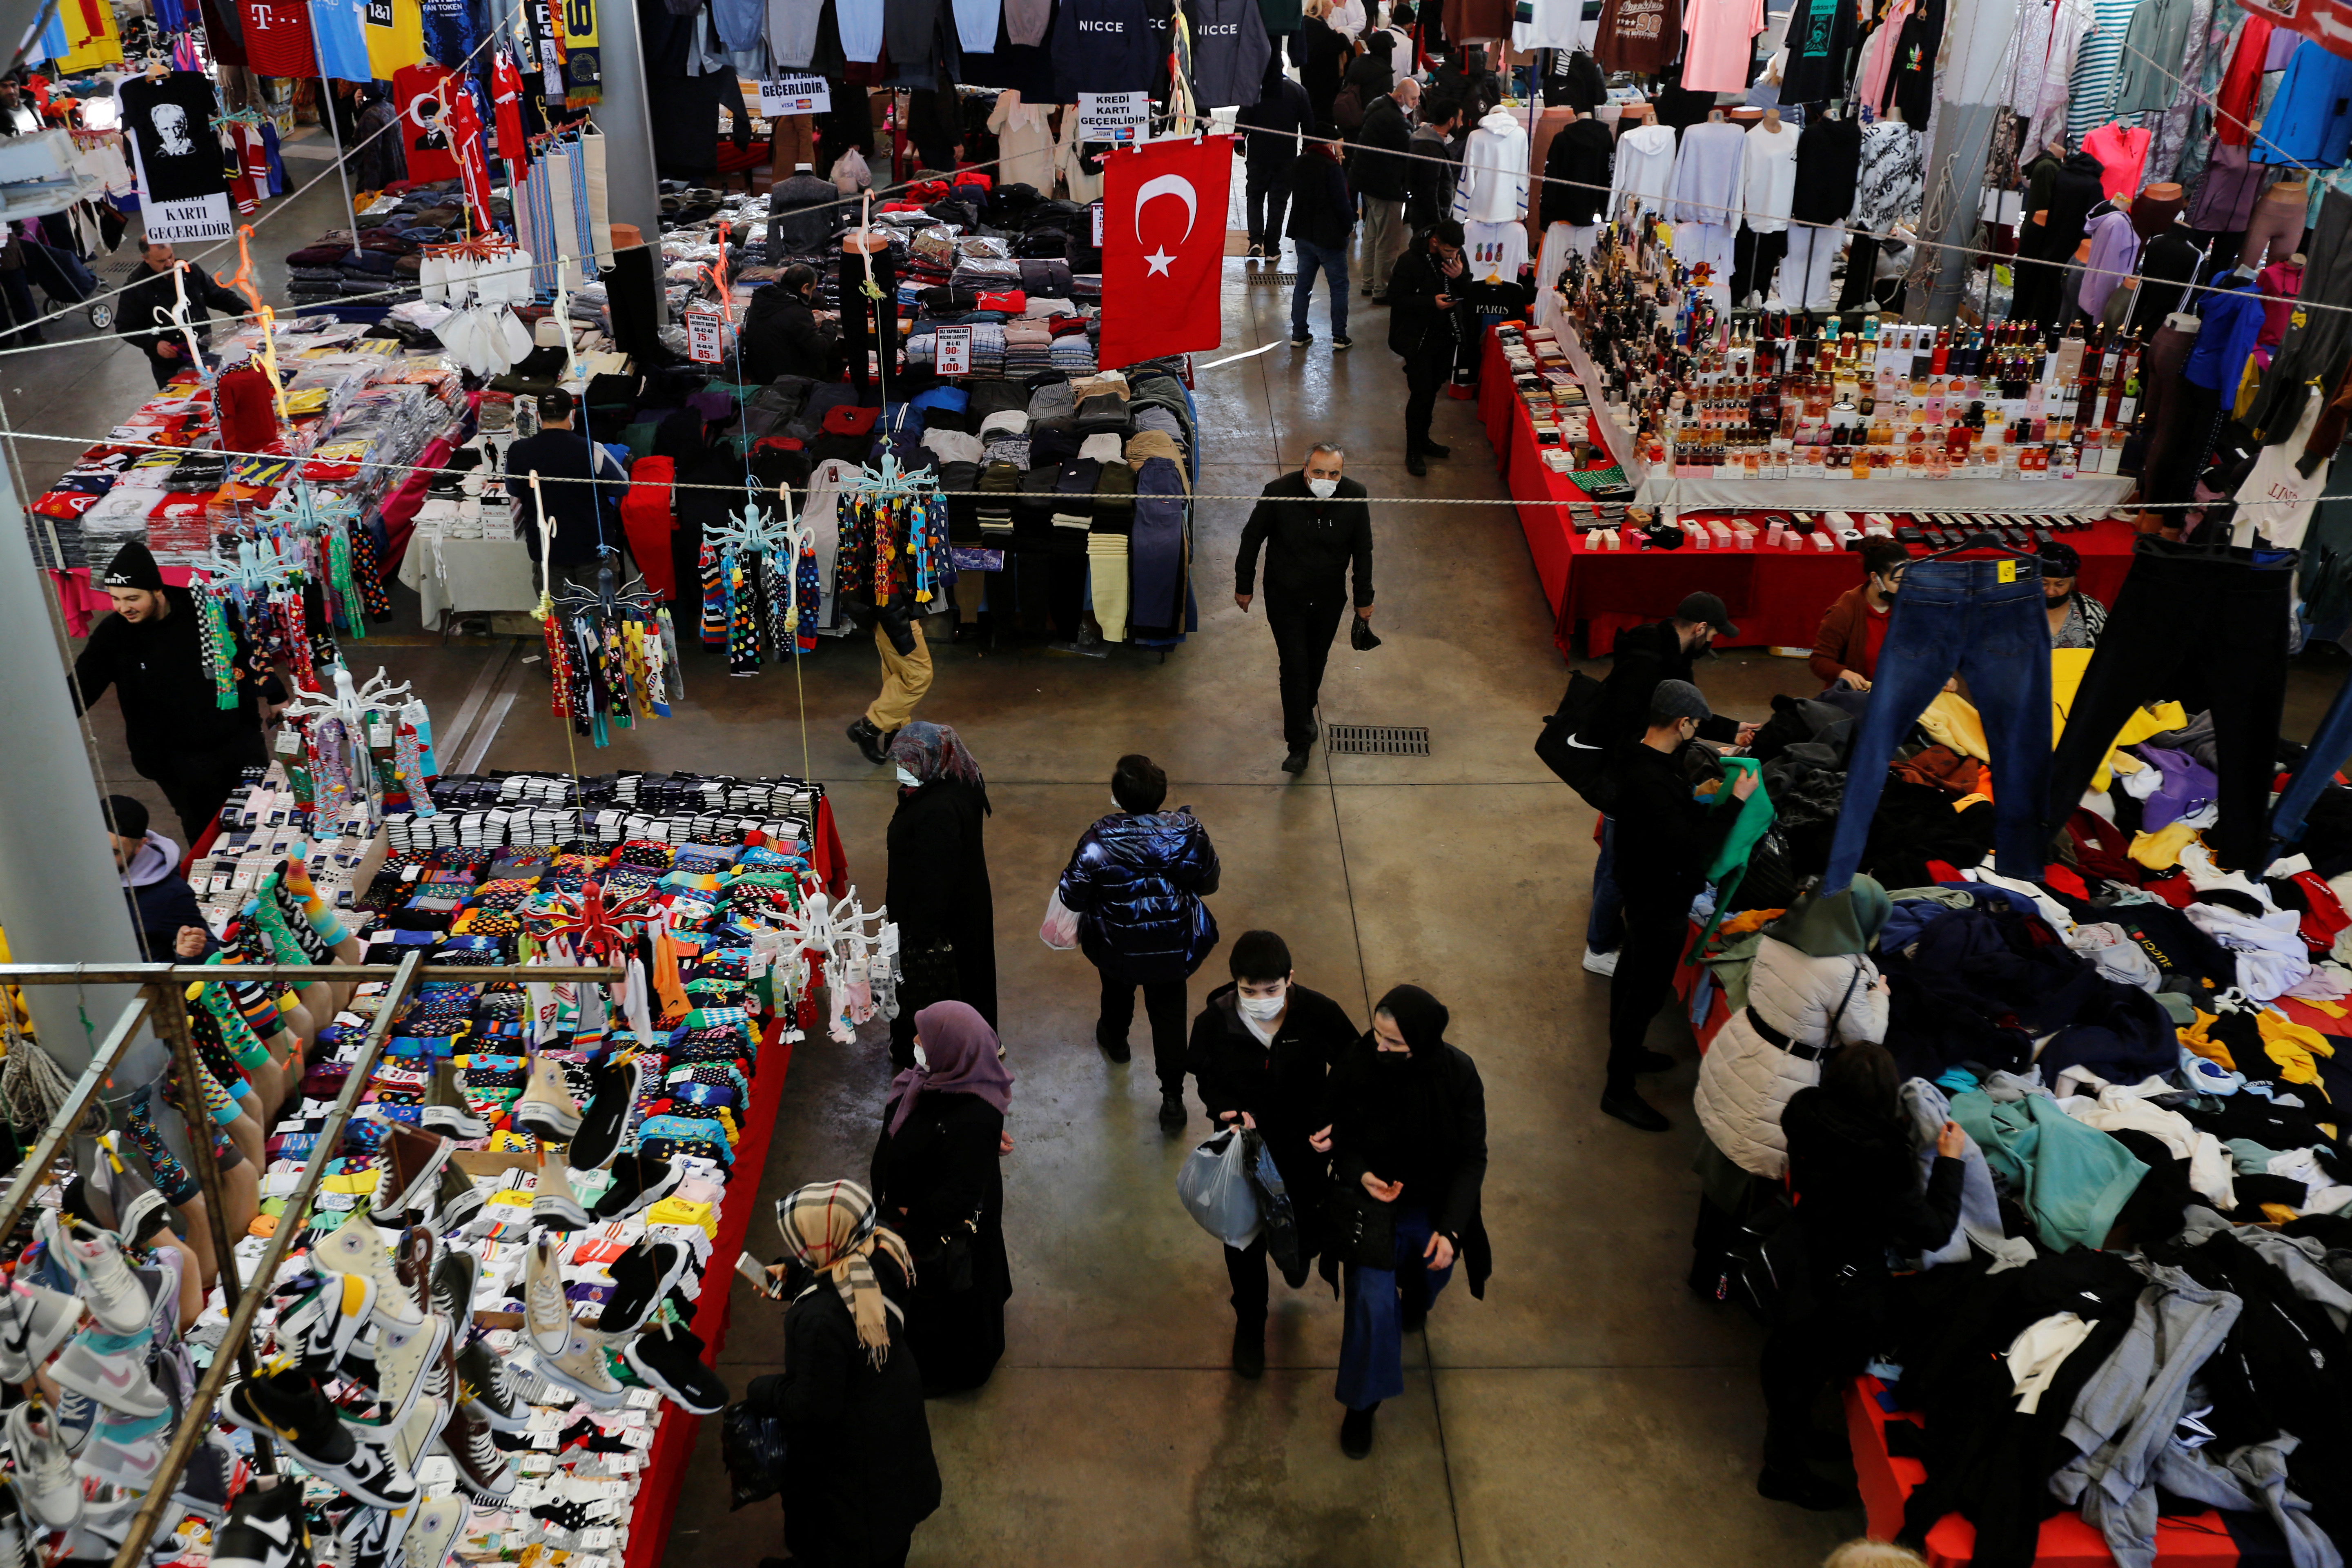 People shop at an open market in Istanbul